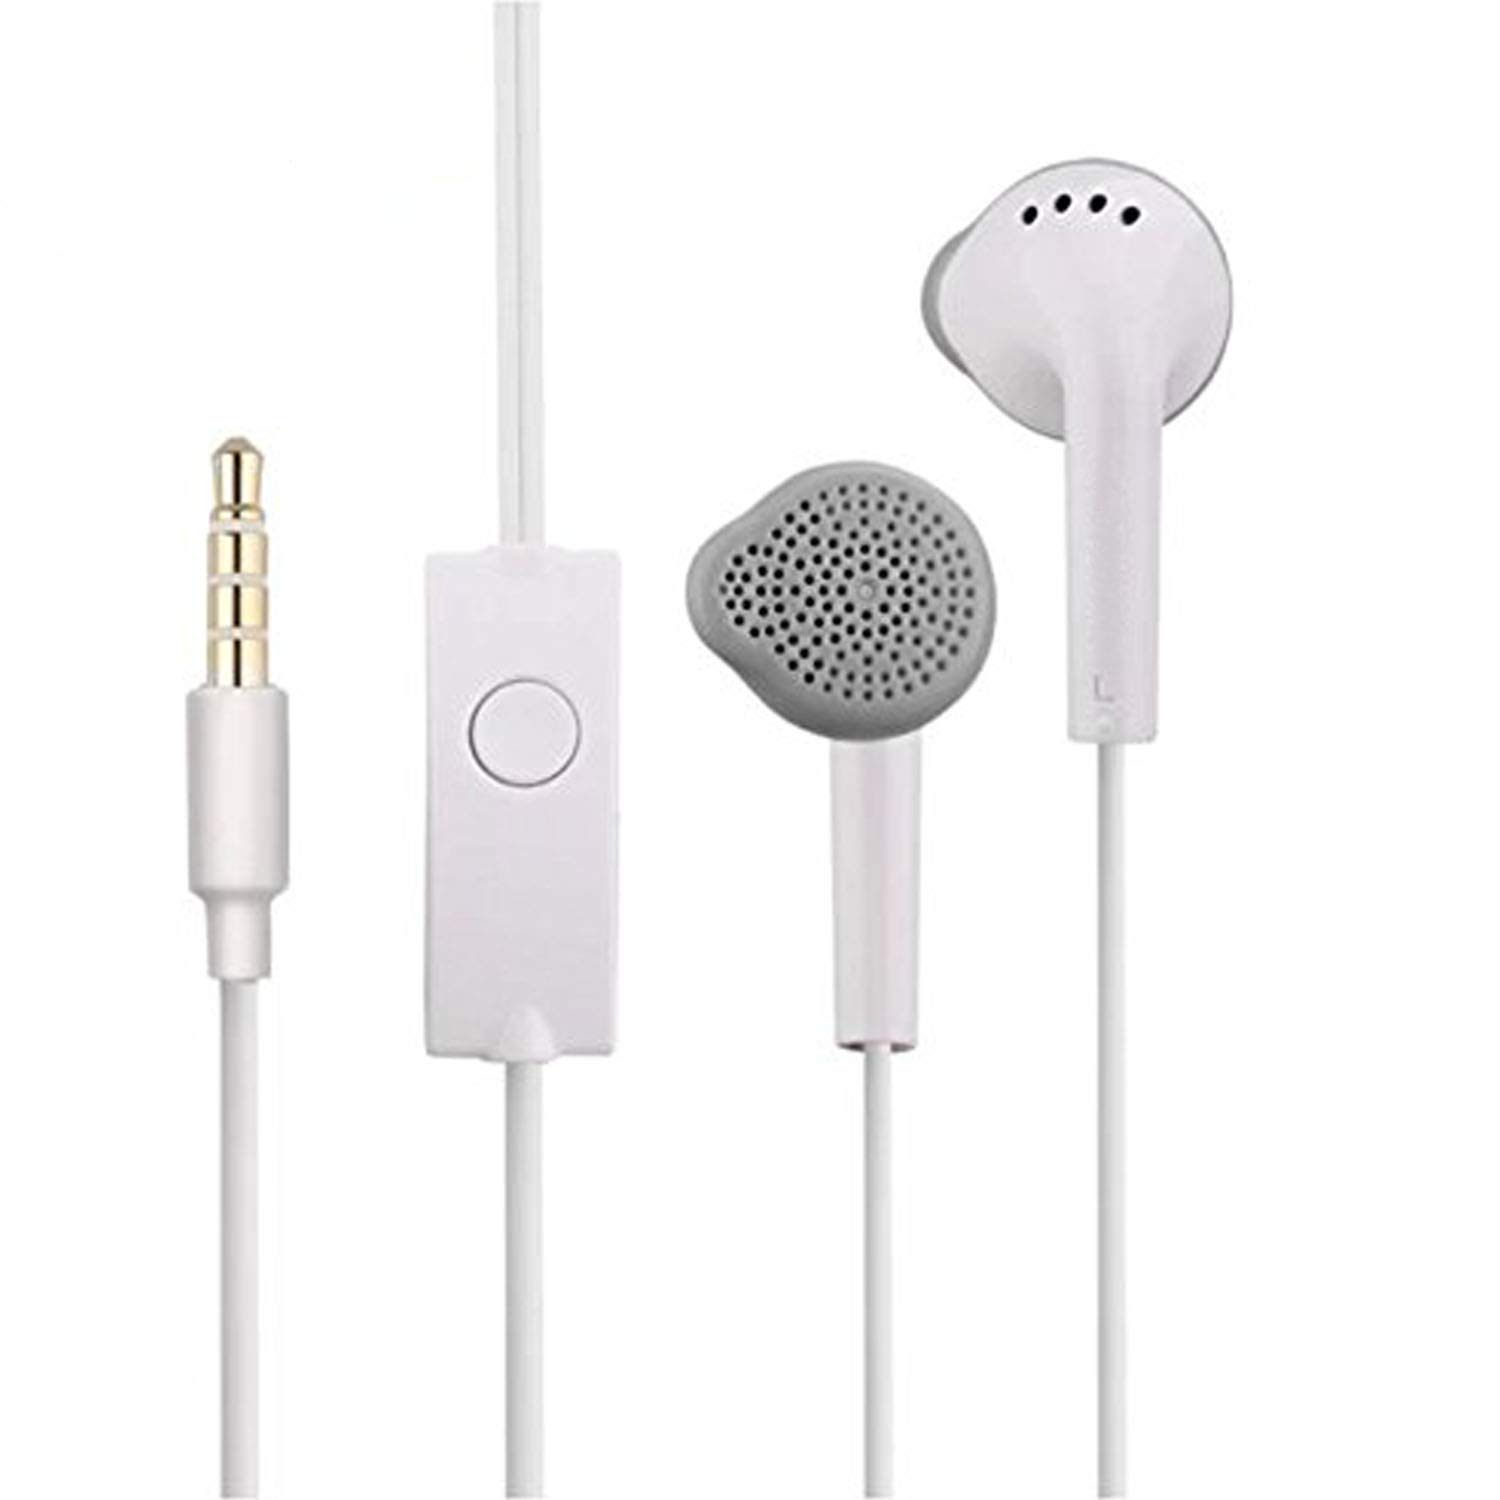 EARPHONE SAMSUNG COPY HIGH QUALITY FOR SMARTPHONE OR TAB عظم ,Smartphones & Tab Headsets